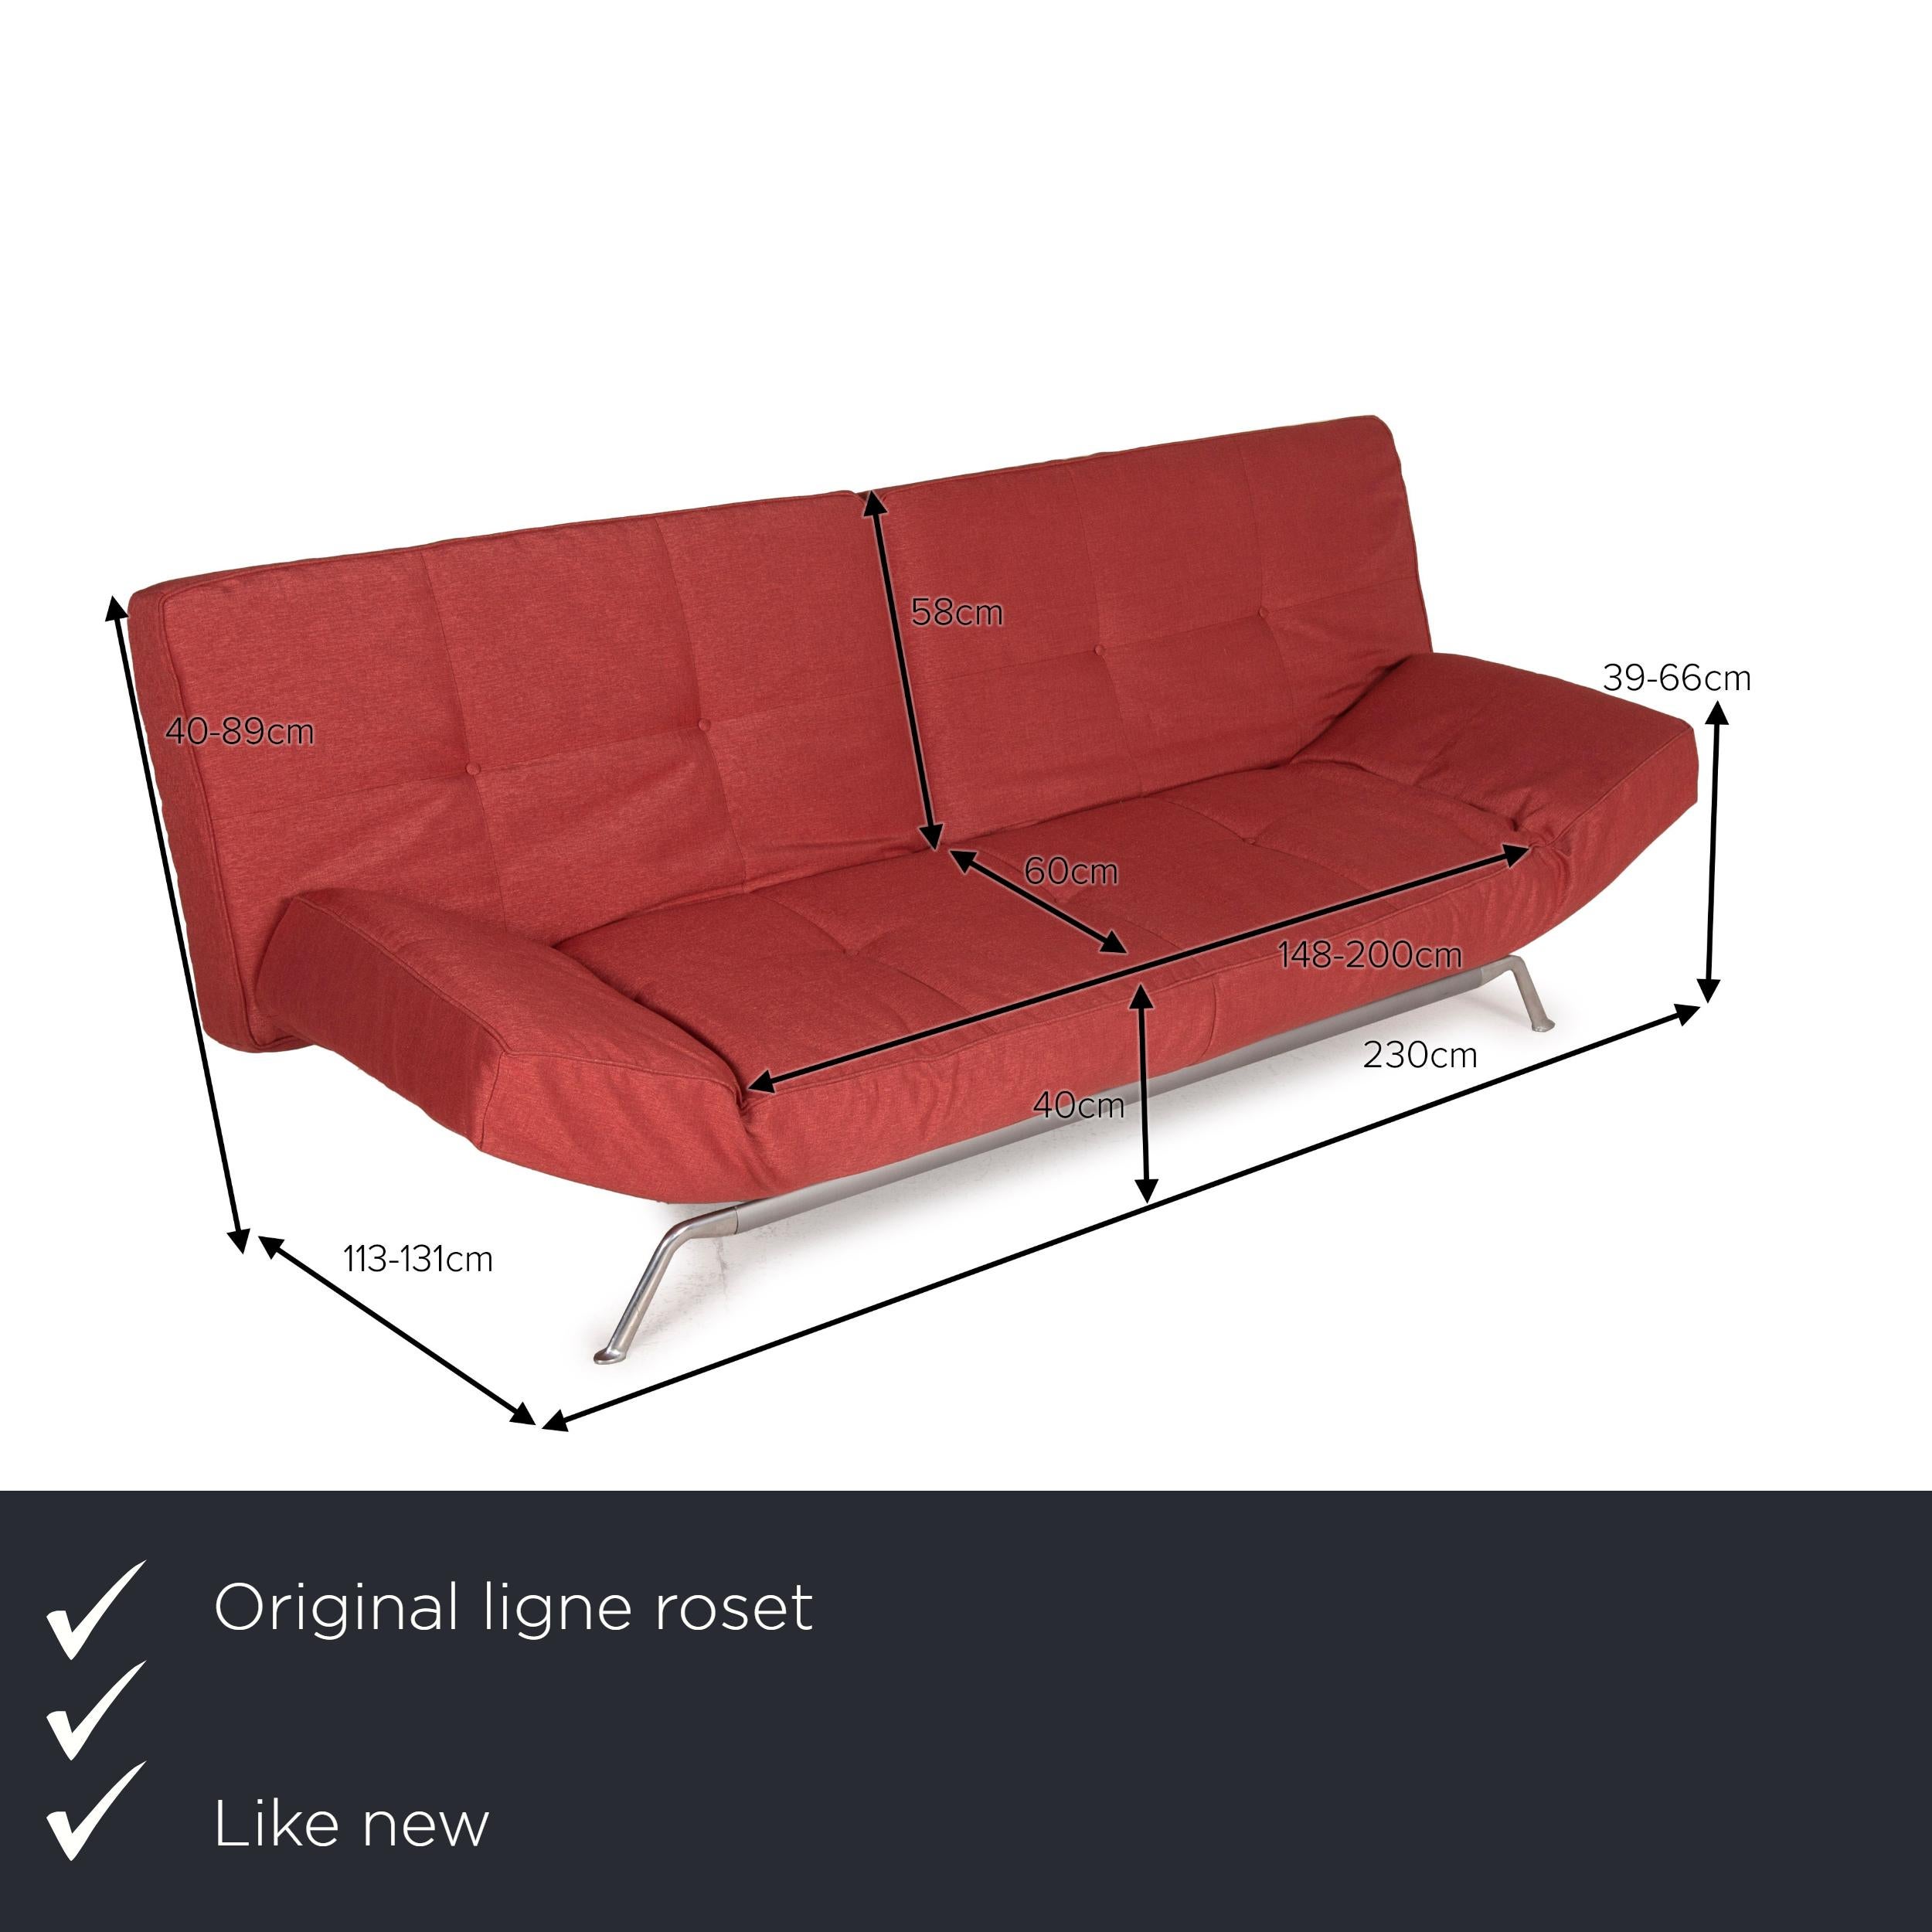 We present to you a ligne roset Smala fabric sofa three-seater sofa bed red rosé.

Product measurements in centimeters:

Depth 113
Width 230
Height 40
Seat height 40
Rest height 39
Seat depth 60
Seat width 148
Back height 58.


 
 